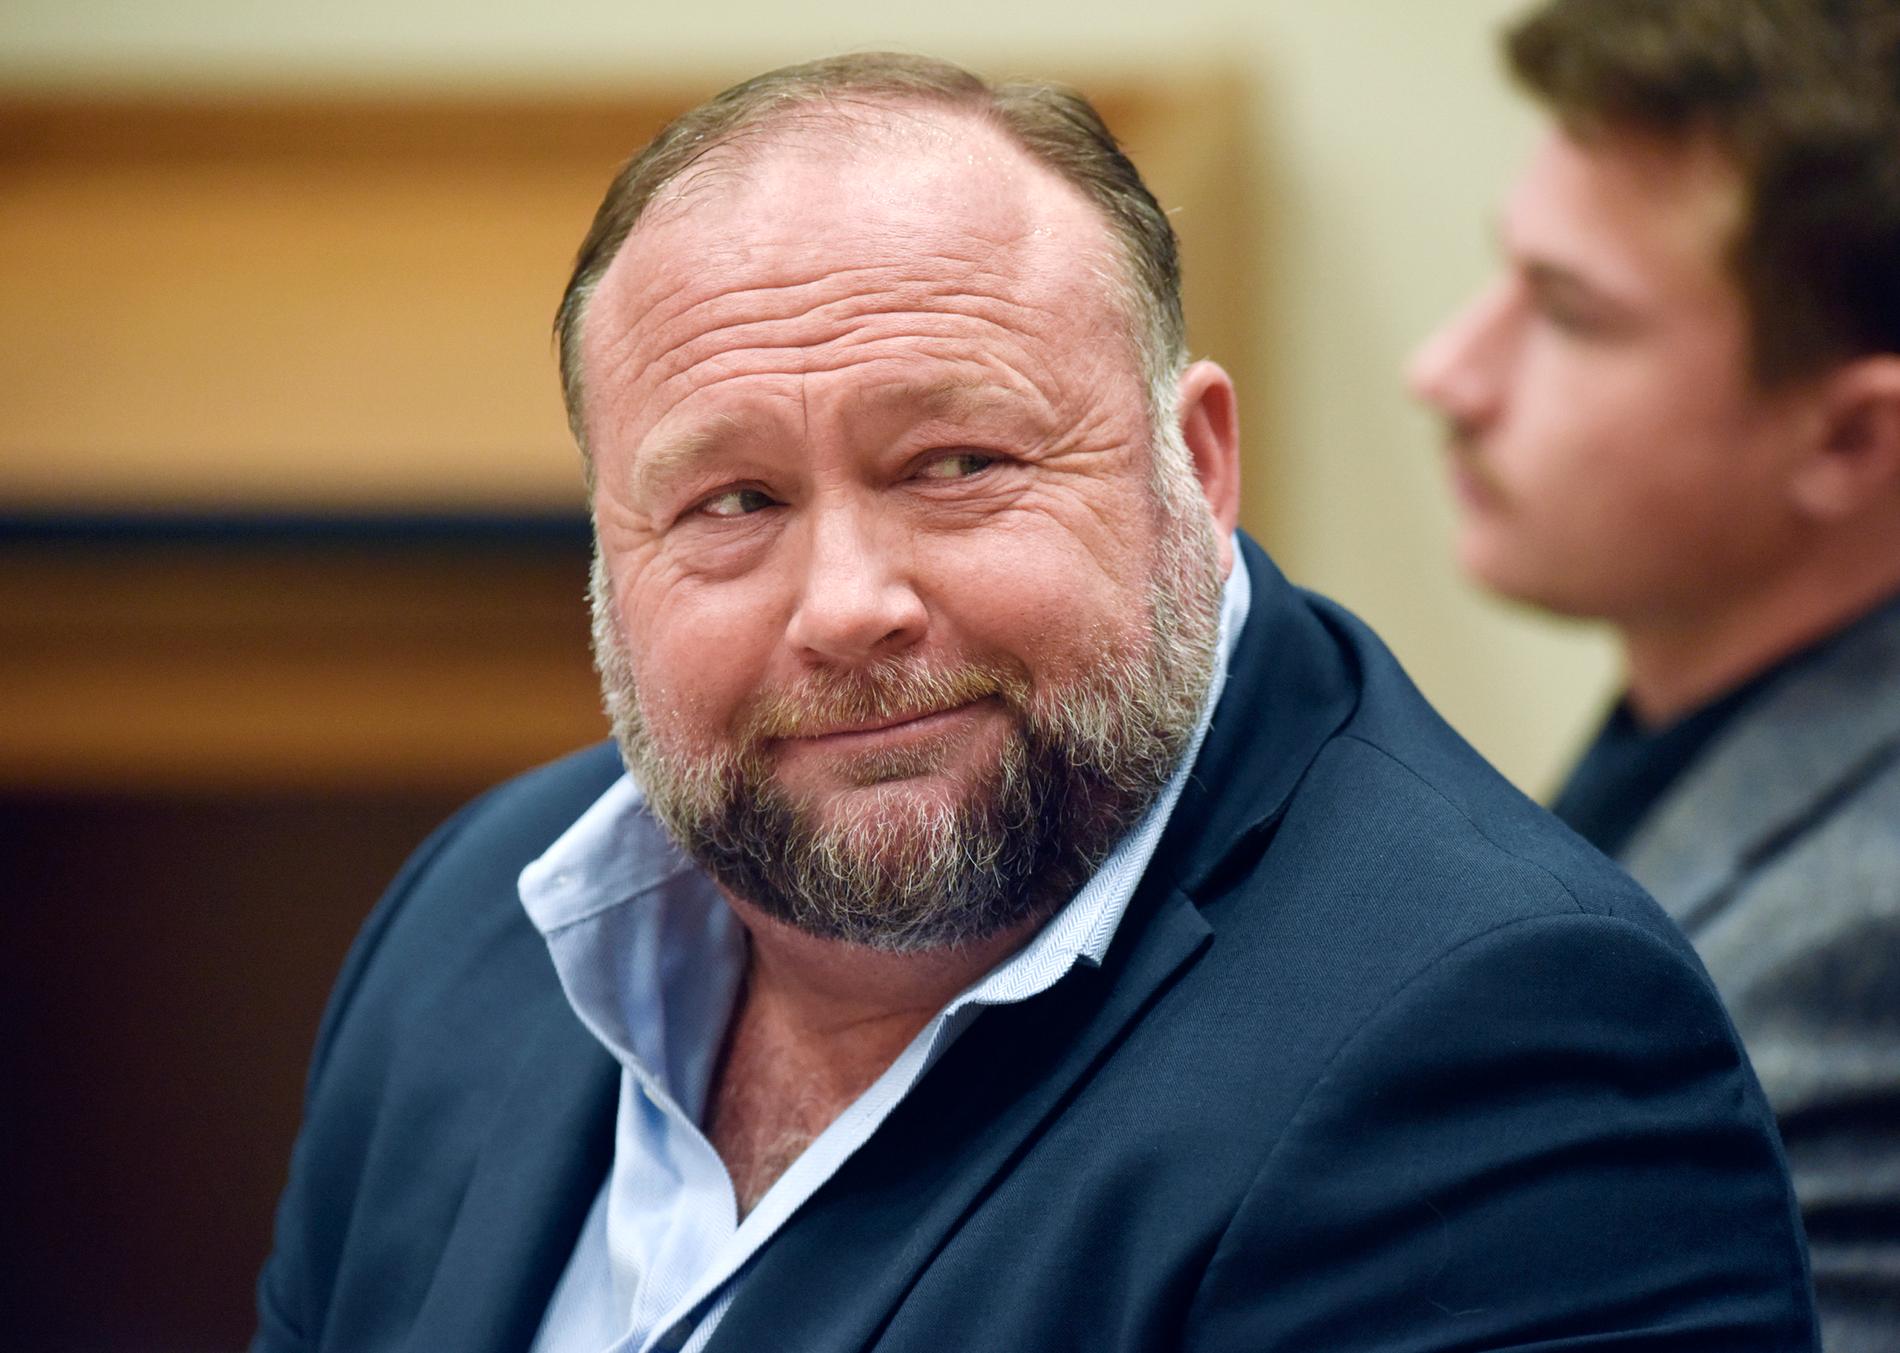 Conspiracy Theorist Alex Jones’ Media Company Faces Account Closure Amidst Bankruptcy Claims and Sandy Hook Shooting Controversy